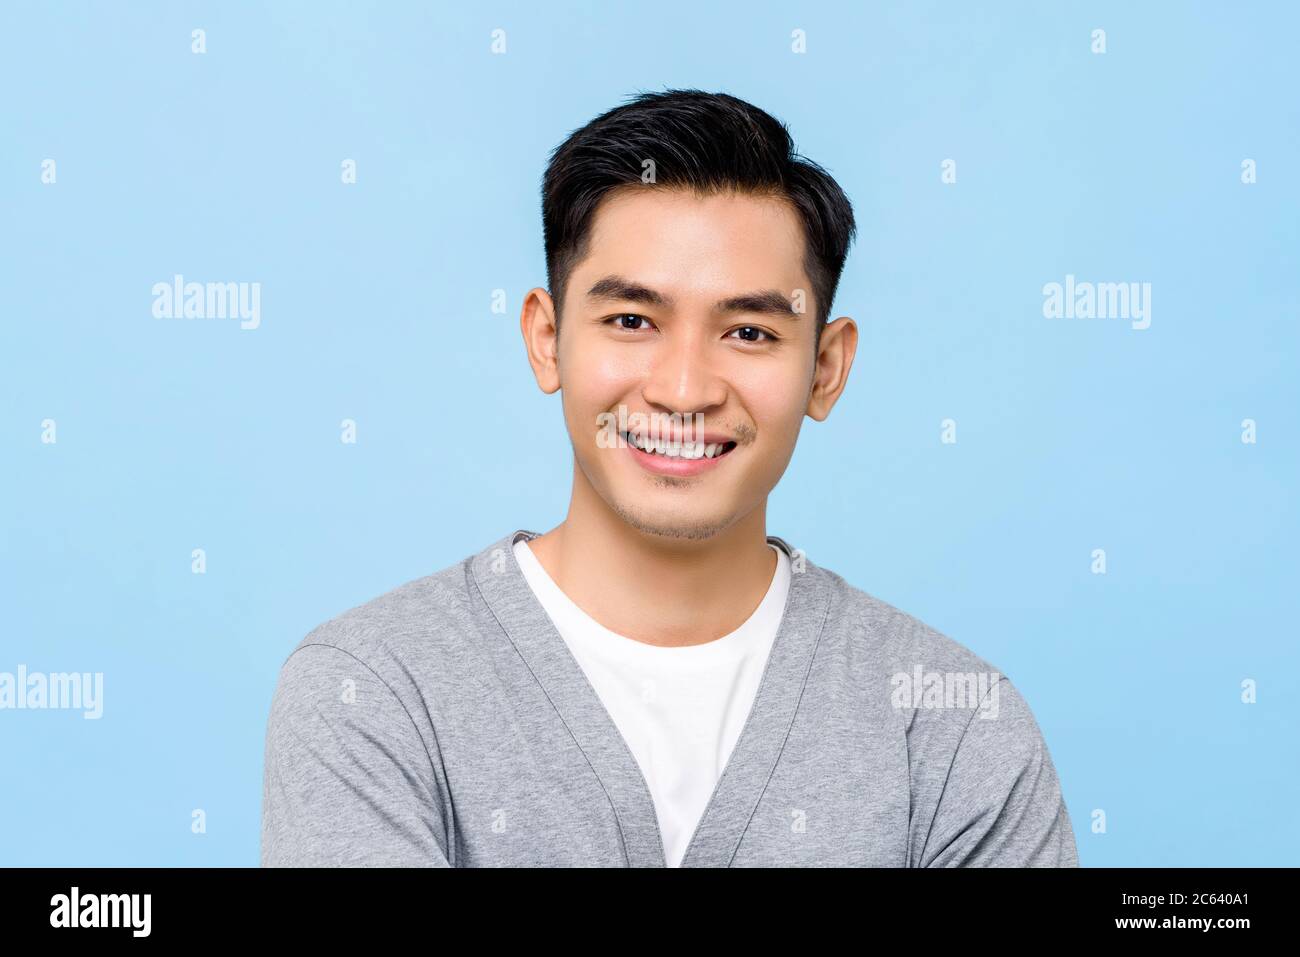 Handsome portrait of young Asian man smiling isolated on light blue background Stock Photo